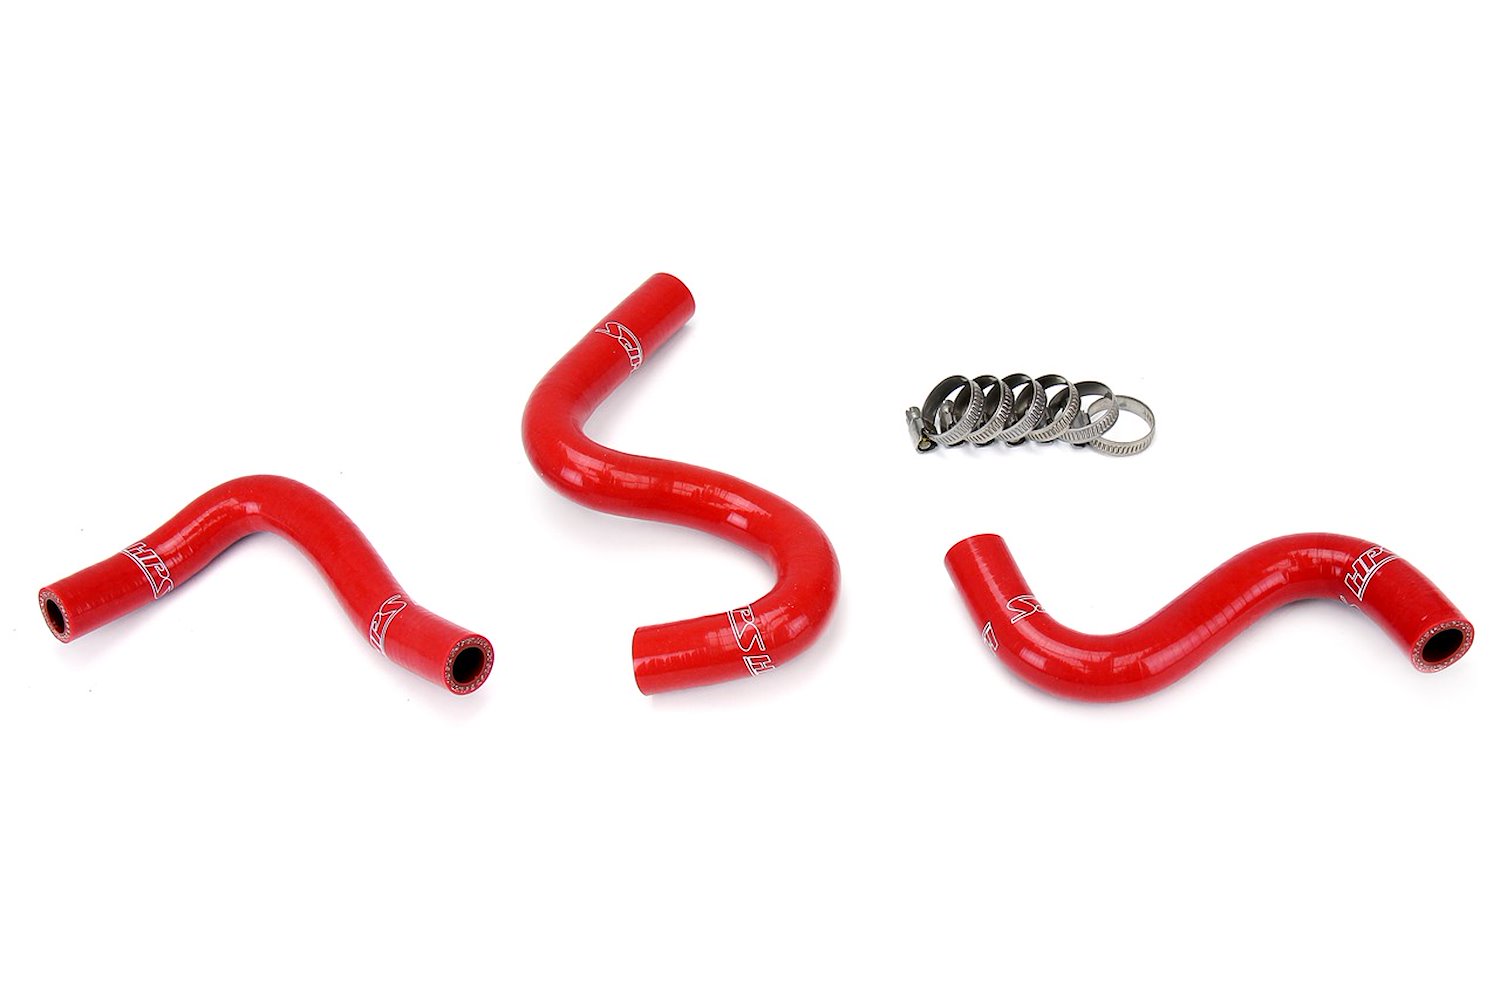 57-1223-RED Heater Hose Kit, High-Temp 3-Ply Reinforced Silicone, Replace OEM Rubber Heater Coolant Hoses